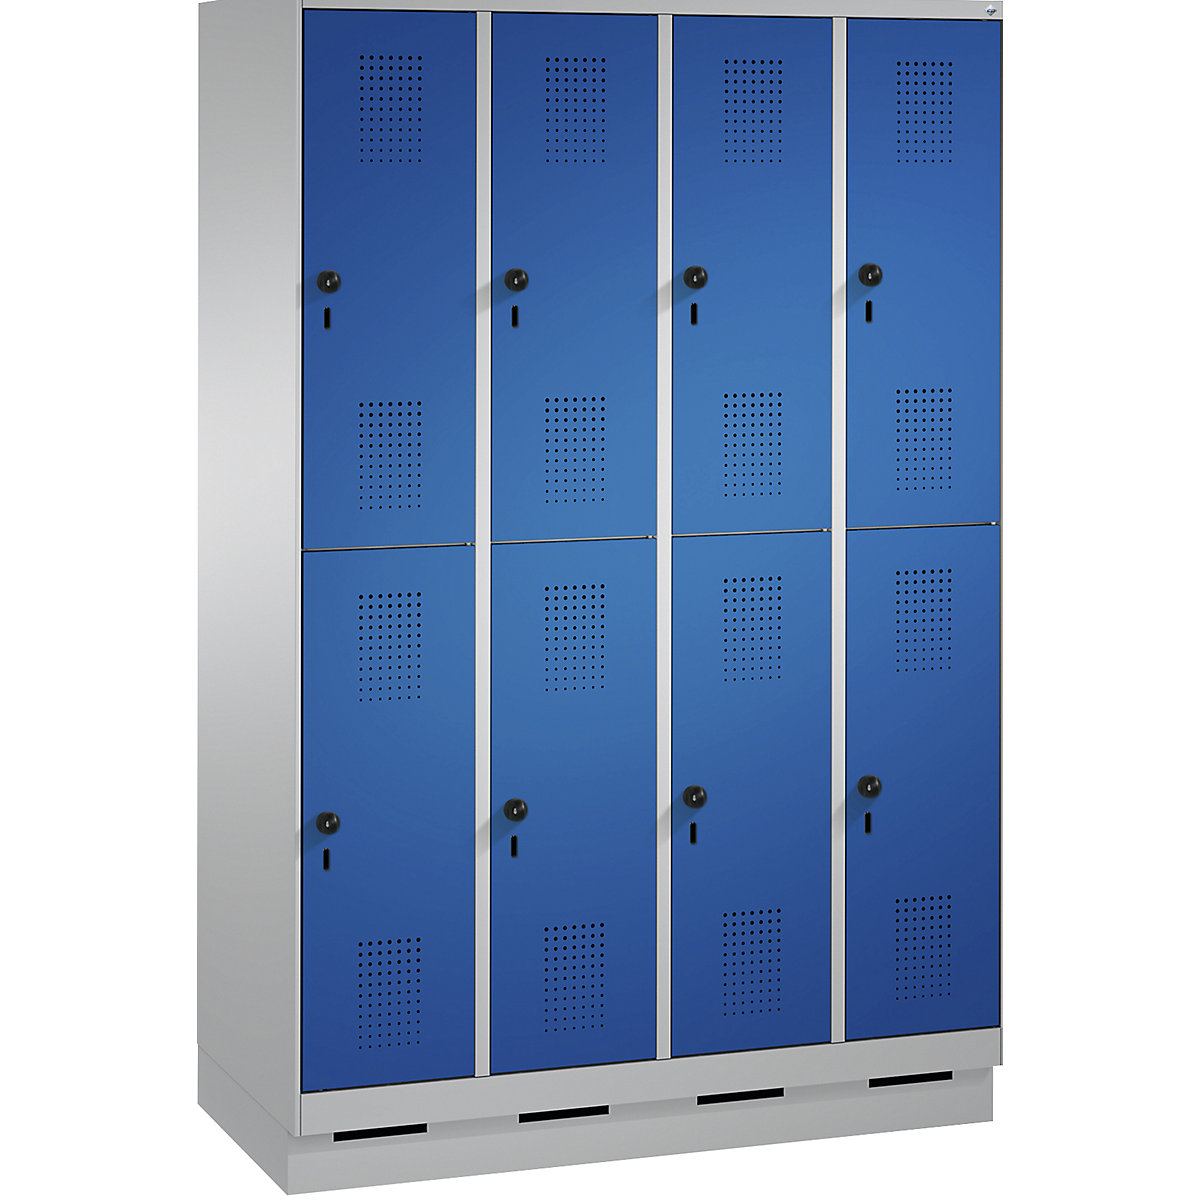 EVOLO cloakroom locker, double tier, with plinth – C+P, 4 compartments, 2 shelf compartments each, compartment width 300 mm, white aluminium / gentian blue-5